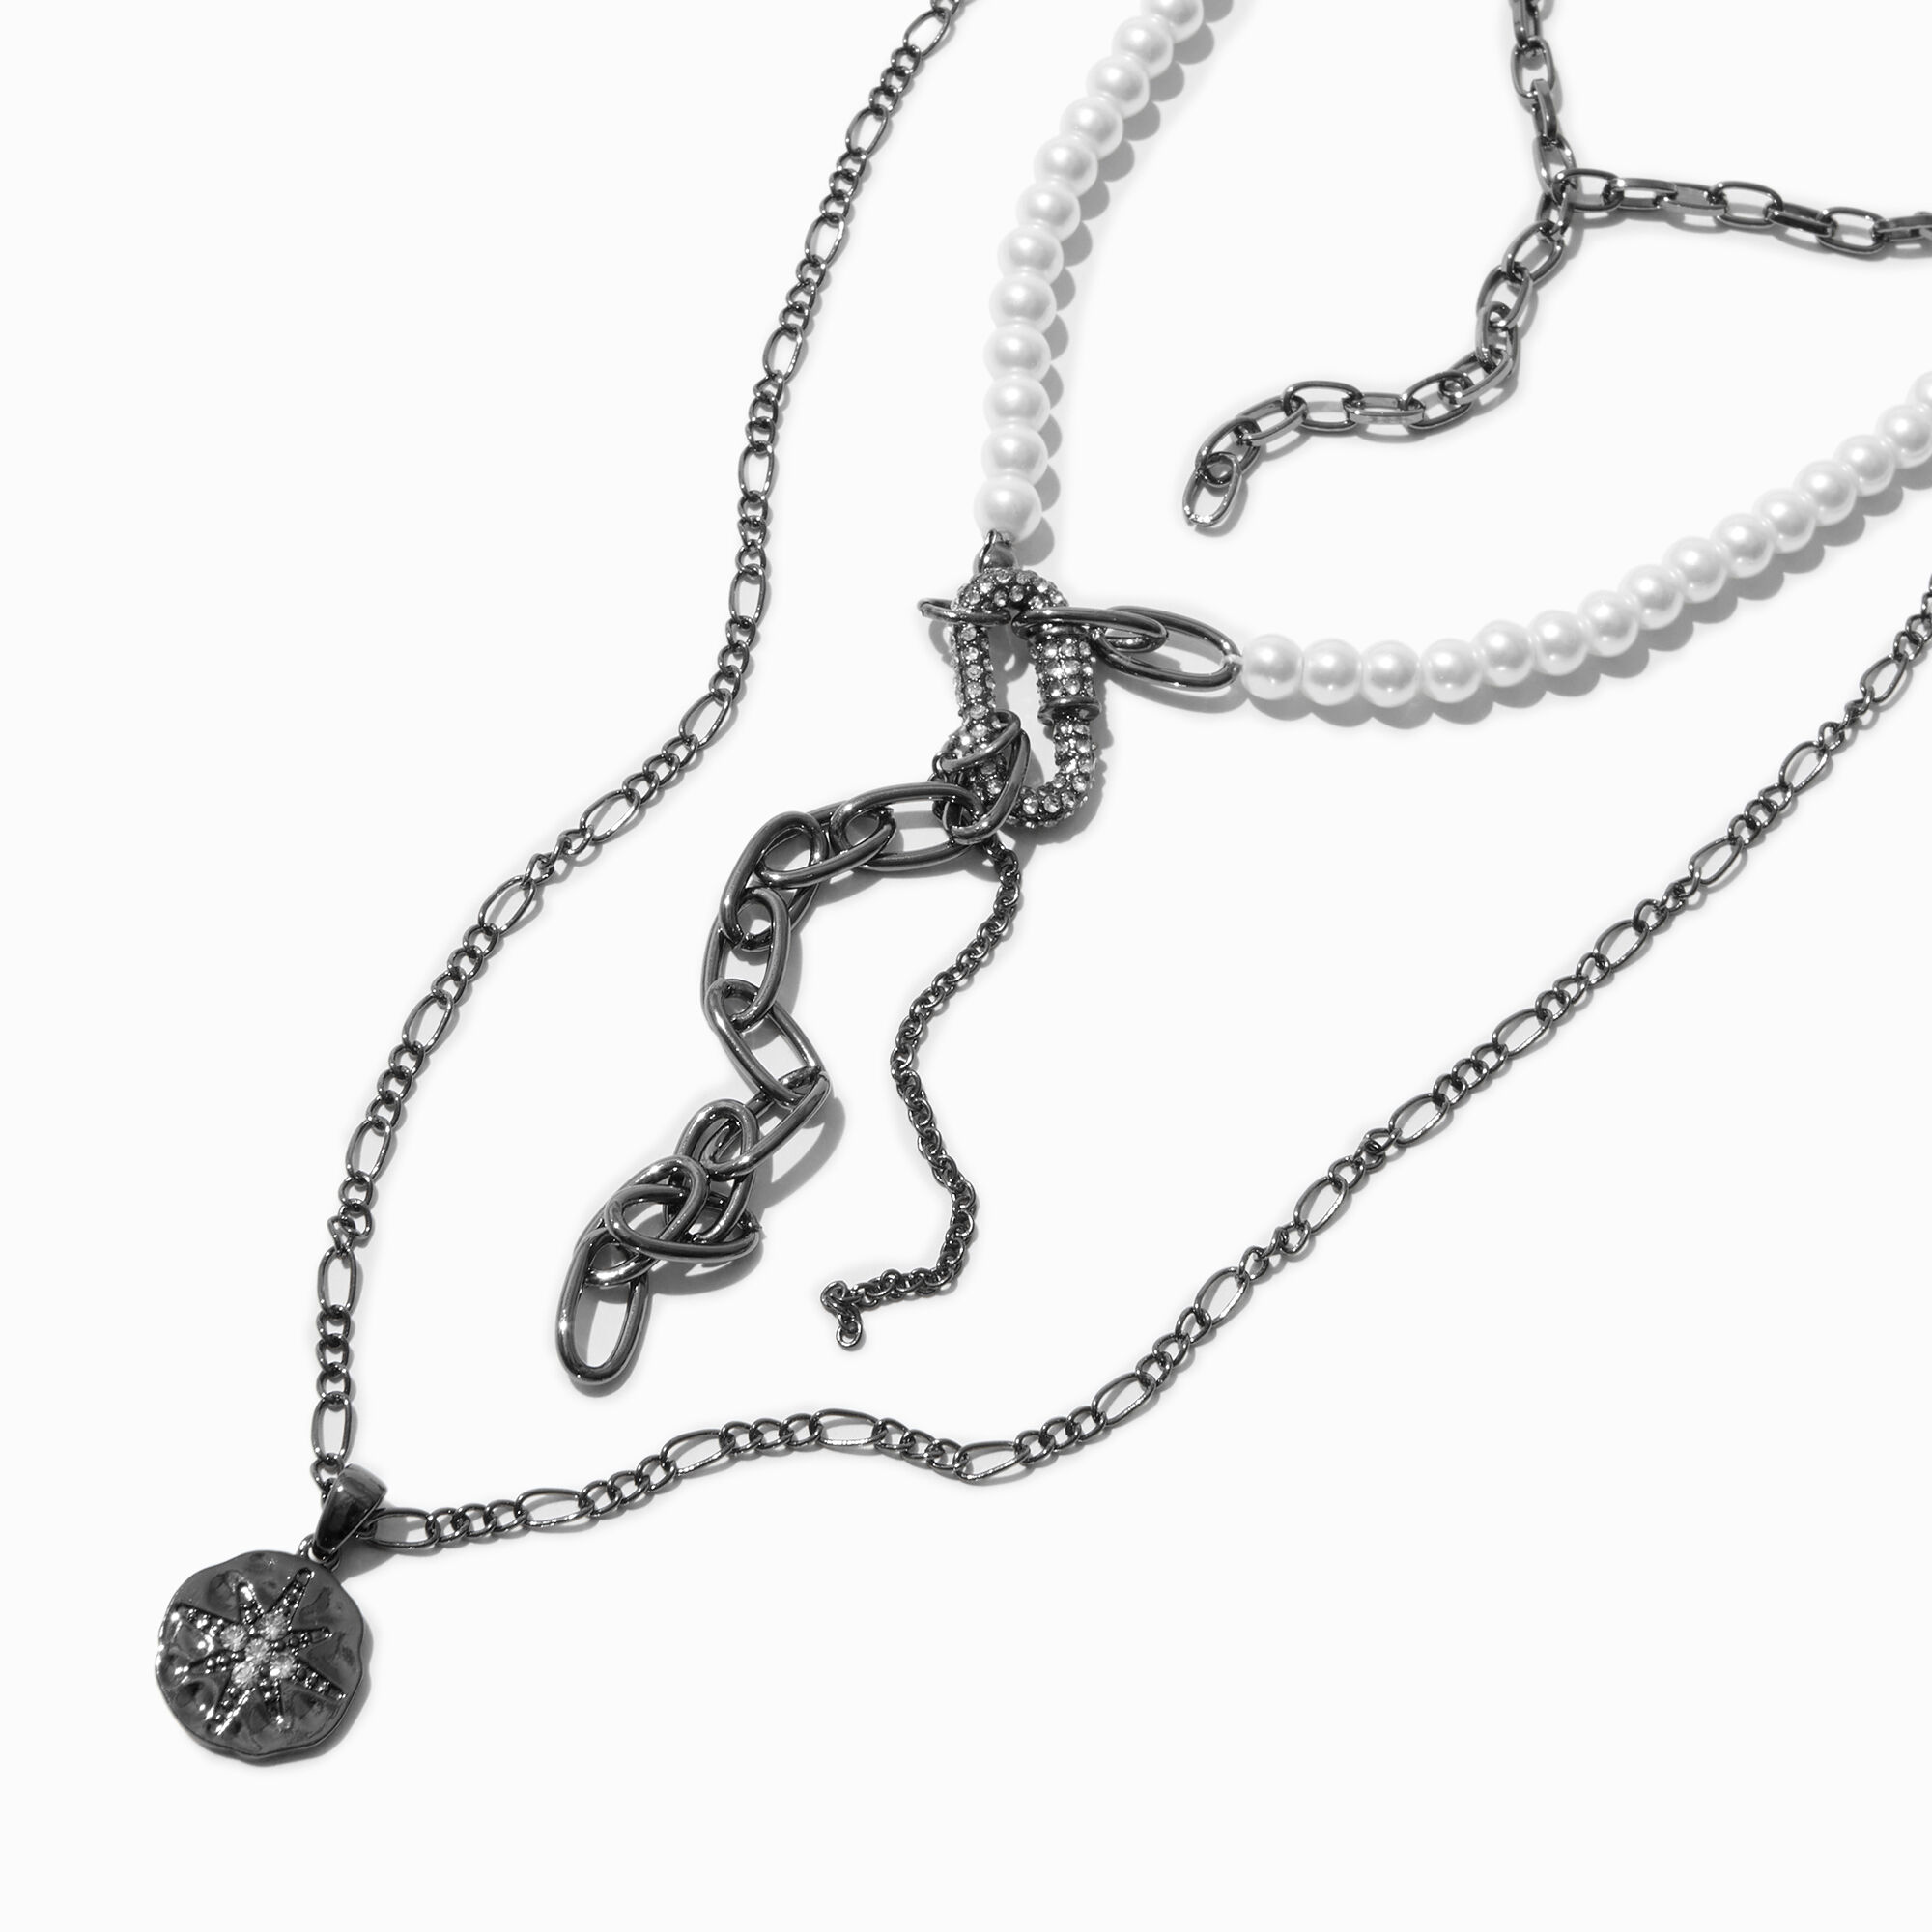 View Claires Hematite Pearl Carabiner YNeck Strand Necklace information